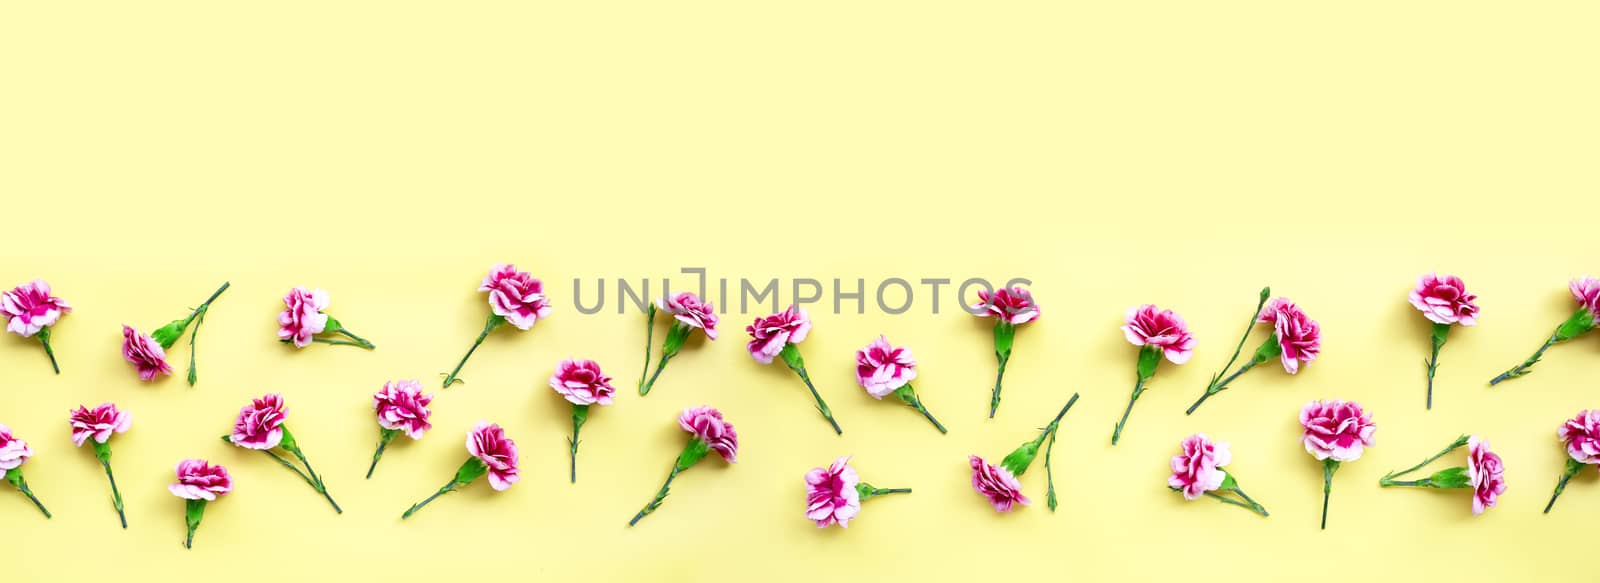 Carnation flower on yellow background. by Bowonpat